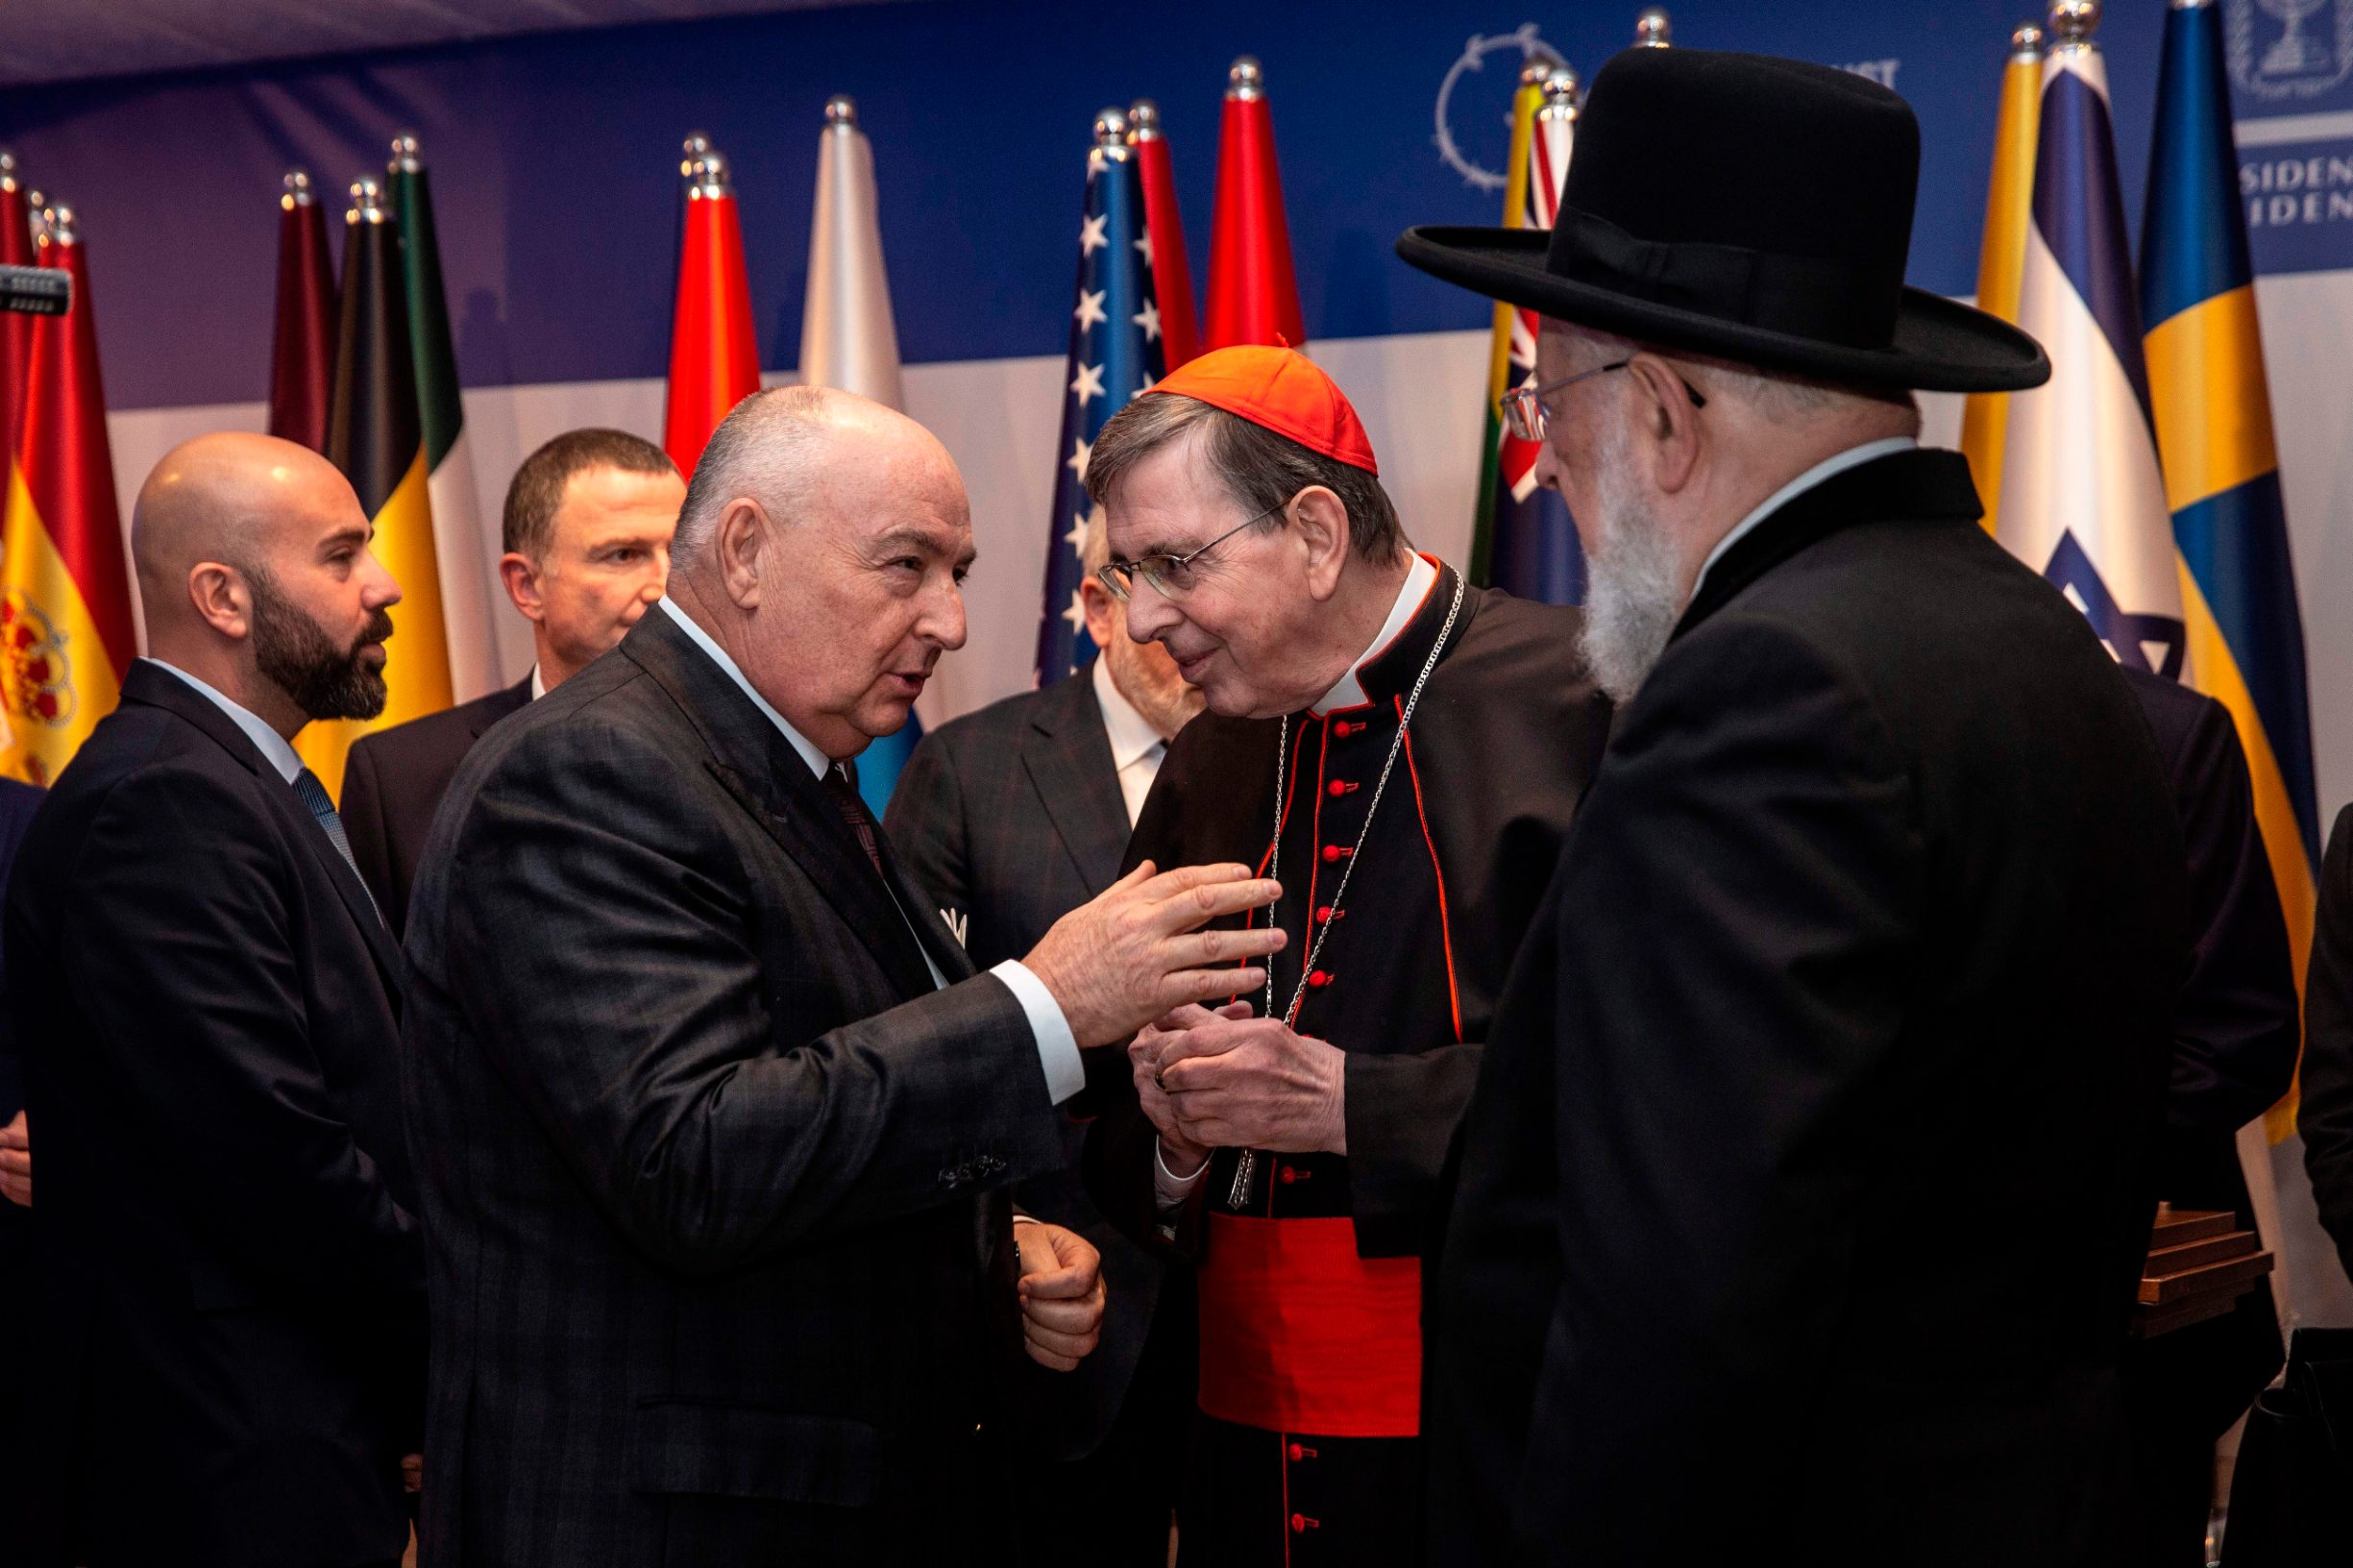 Head of the European Jewish Congress Moshe Kantor (2nd L) chats with the chief rabbi of Tel Aviv Yisrael Meir Lau (R) and president of the Pontifical Council for Promoting Christian Unity Bishop Kurt Koch (2nd R) during a dinner reception at the Israeli President's official residence in Jerusalem, on January 22, 2020. - Dozens of world leaders are arriving to Israel ahead of January 23, to attend ceremonies marking 75 years since the liberation of Auschwitz, the World War II death camp where the Nazis killed more than 1.1 million people, most of them Jews. (Photo by Heidi Levine / POOL / AFP)